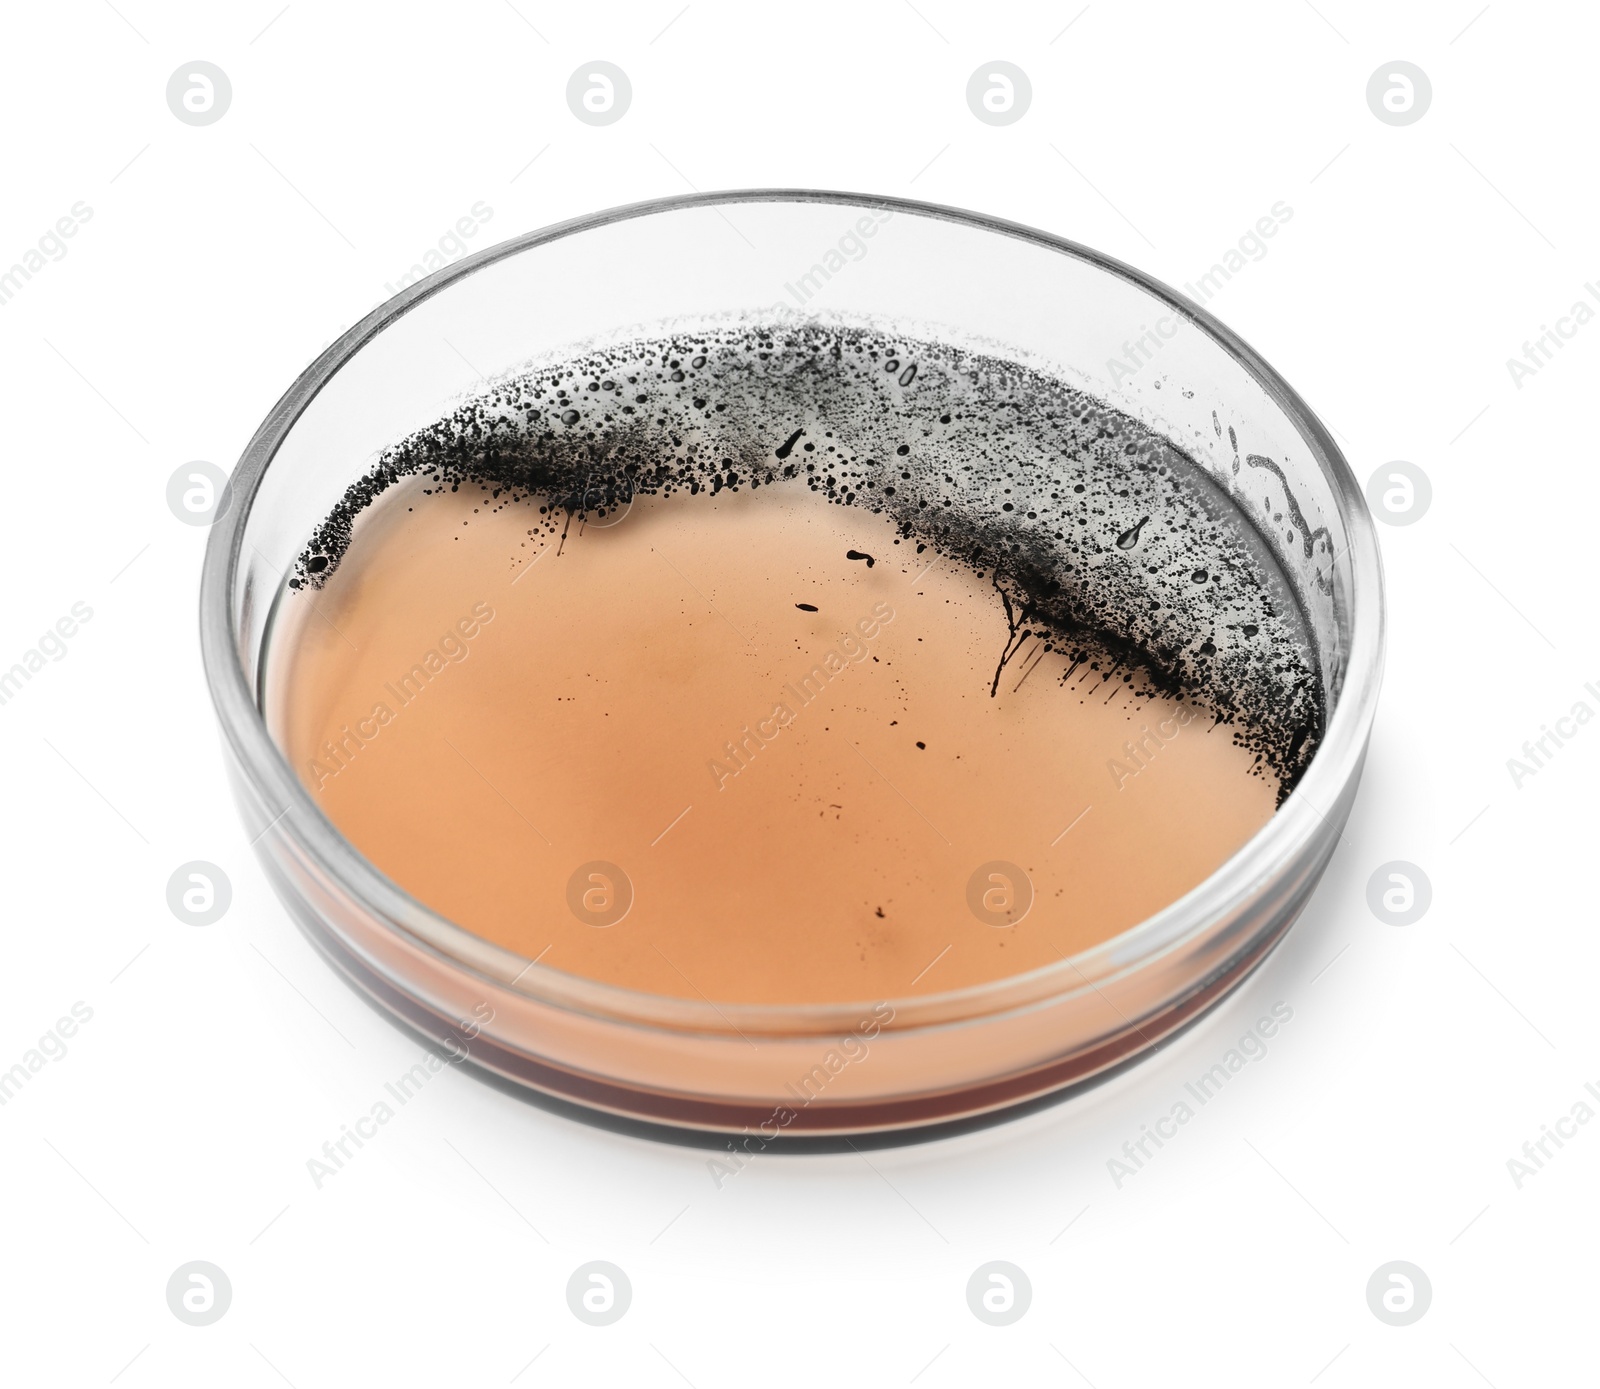 Photo of Petri dish with bacteria colony isolated on white